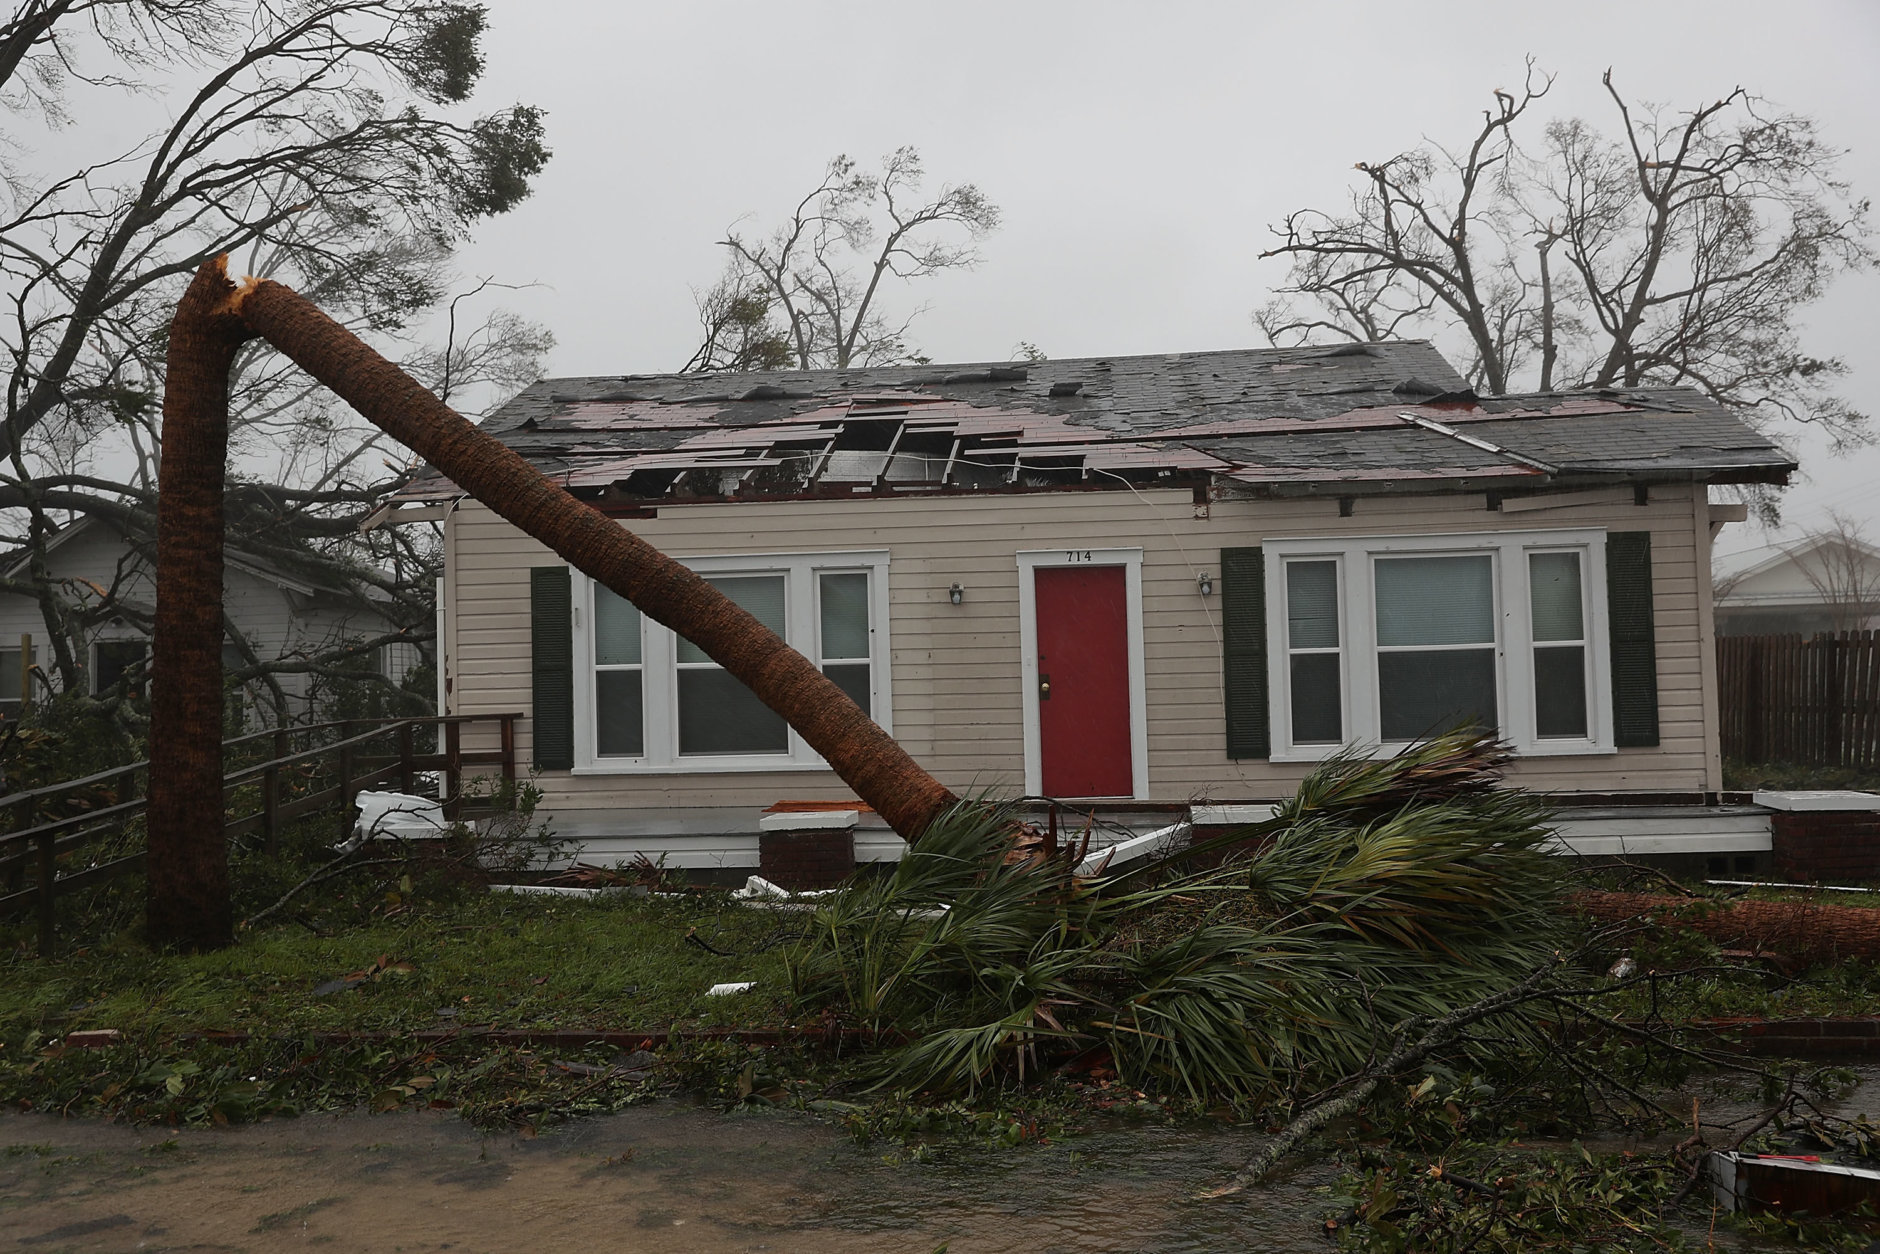 PANAMA CITY, FL - OCTOBER 10:  A damaged home is seen after hurricane Michael passed through the area on October 10, 2018 in Panama City, Florida. The hurricane hit the Florida Panhandle as a category 4 storm.  (Photo by Joe Raedle/Getty Images)